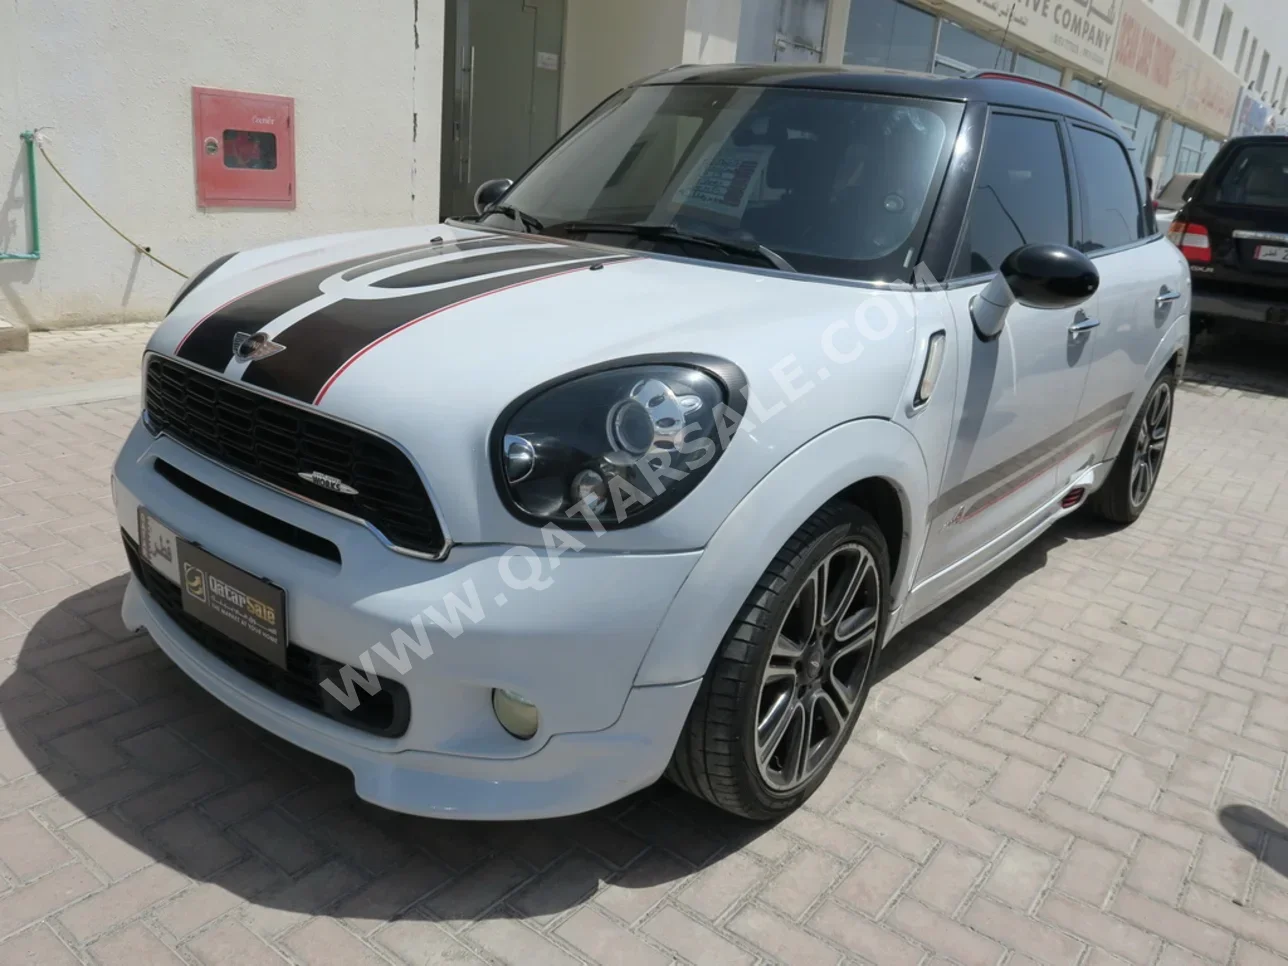 Mini  Cooper  Works  2013  Automatic  107,000 Km  4 Cylinder  Front Wheel Drive (FWD)  Hatchback  White